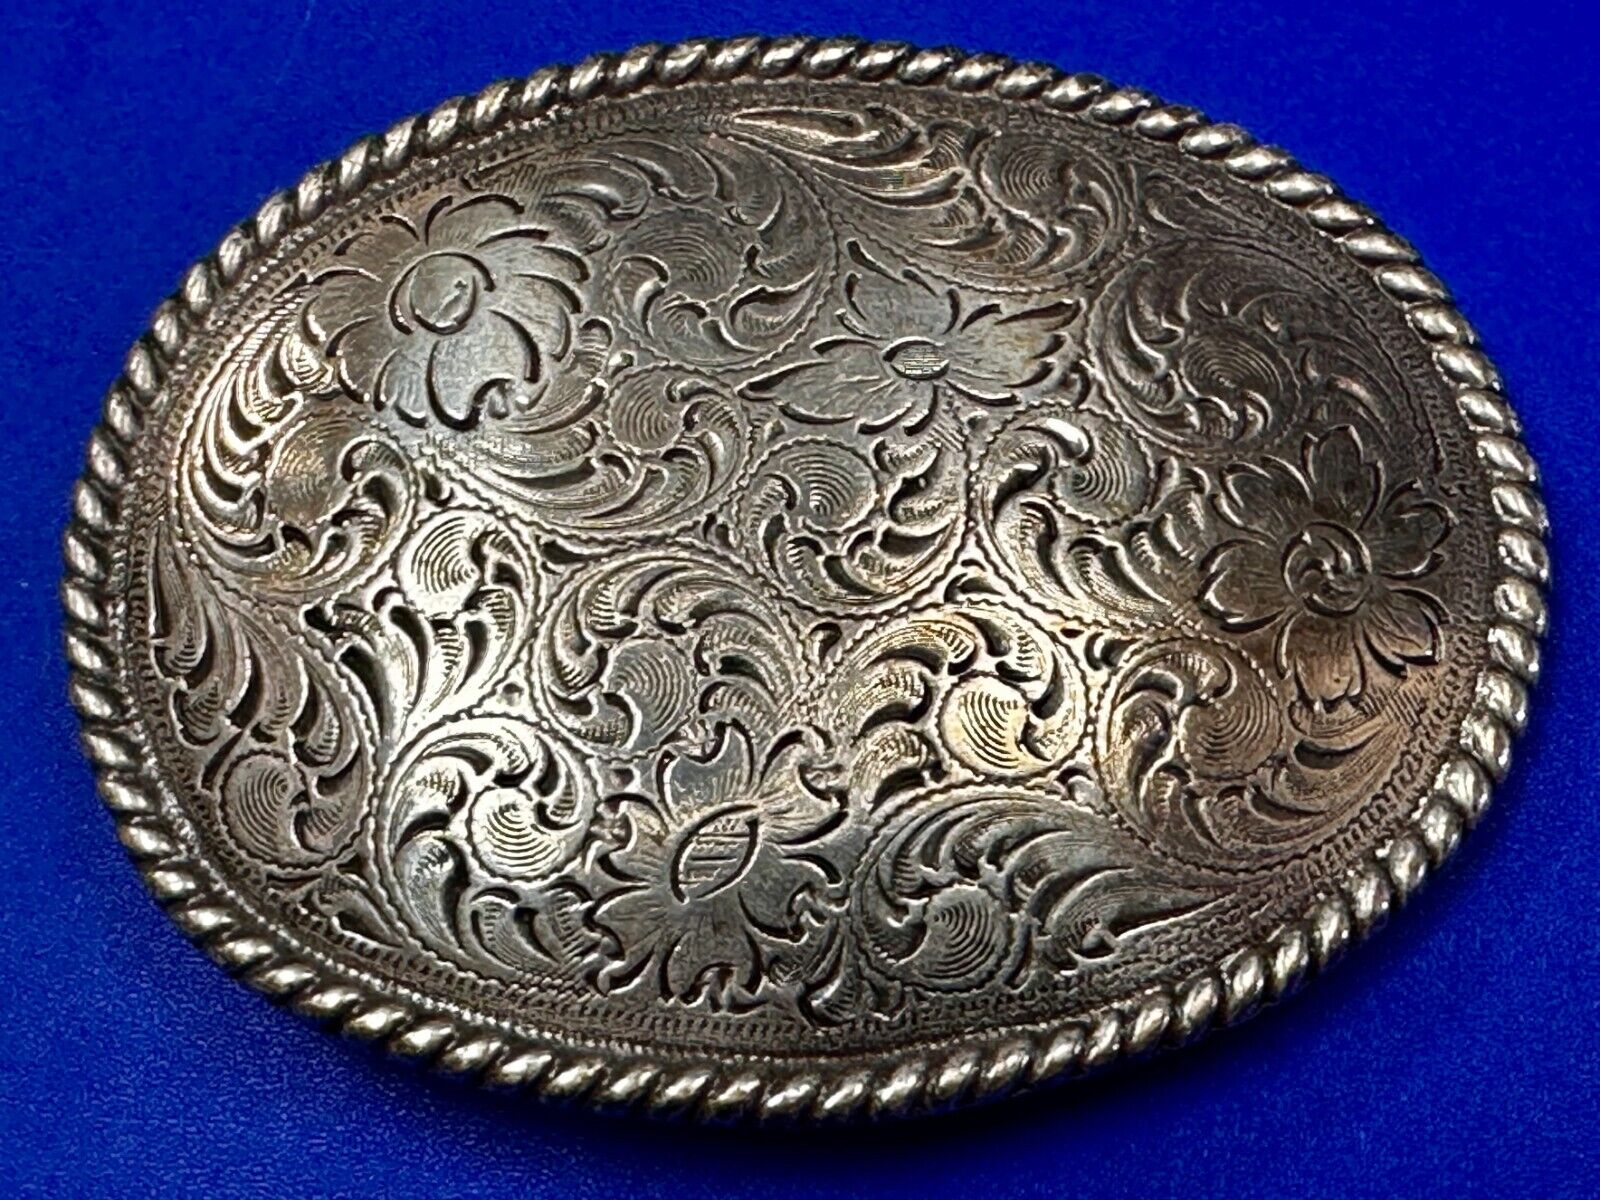 Nocona Floral Theme Silver Tone Western Ornate Belt Buckle W/ Thick Rope Boarder